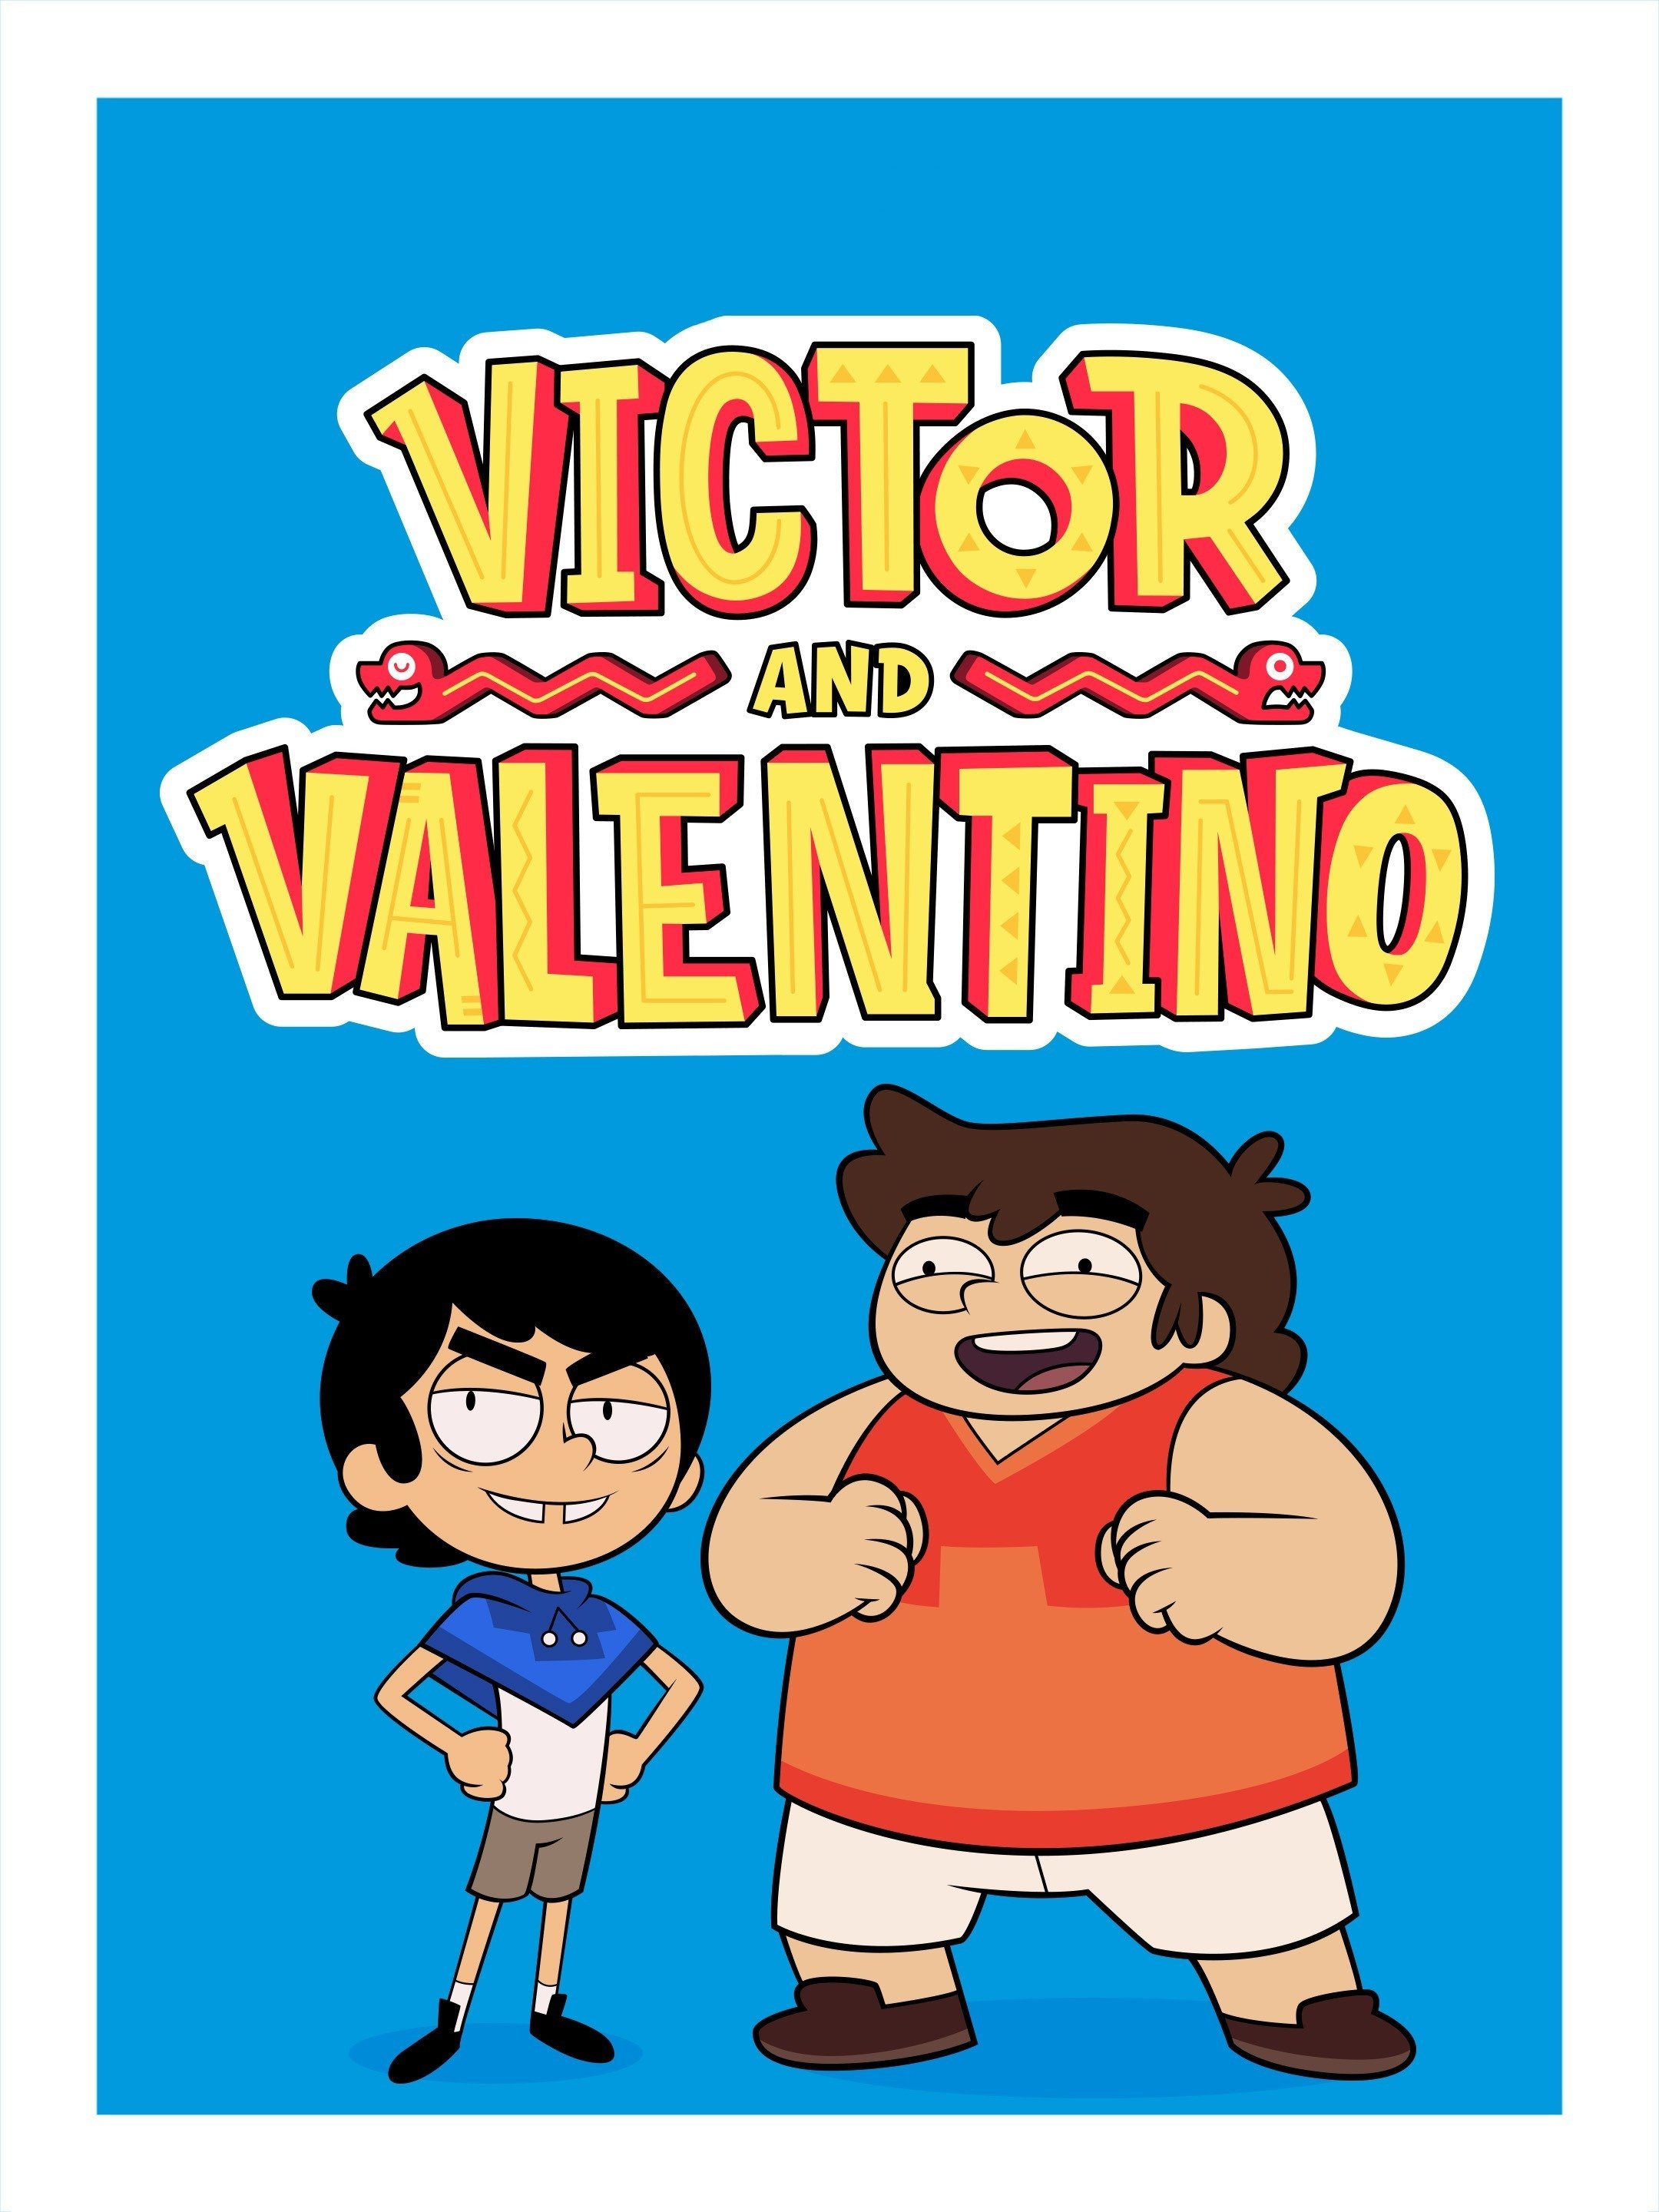 Victor and Valentino.